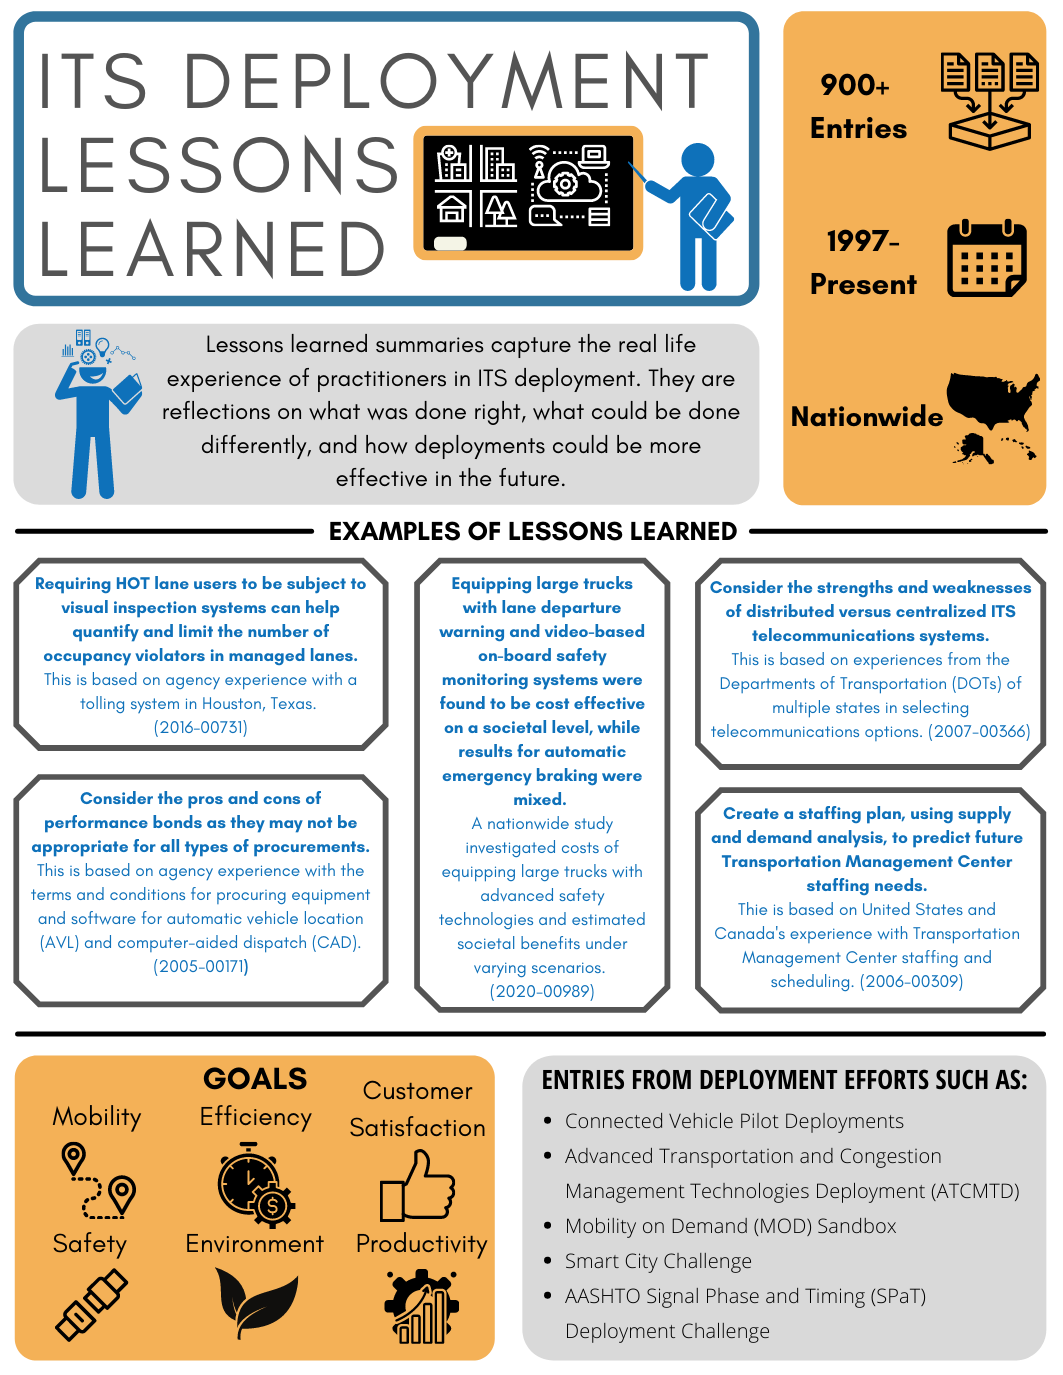 This infographic summarizes key information about the ITS Deployment Evaluation Lessons Learned Database. Included are statistics on the breadth of the database, goal areas, deployment efforts from which lessons learned were pulled, and highlighted examples of lessons learned entries.